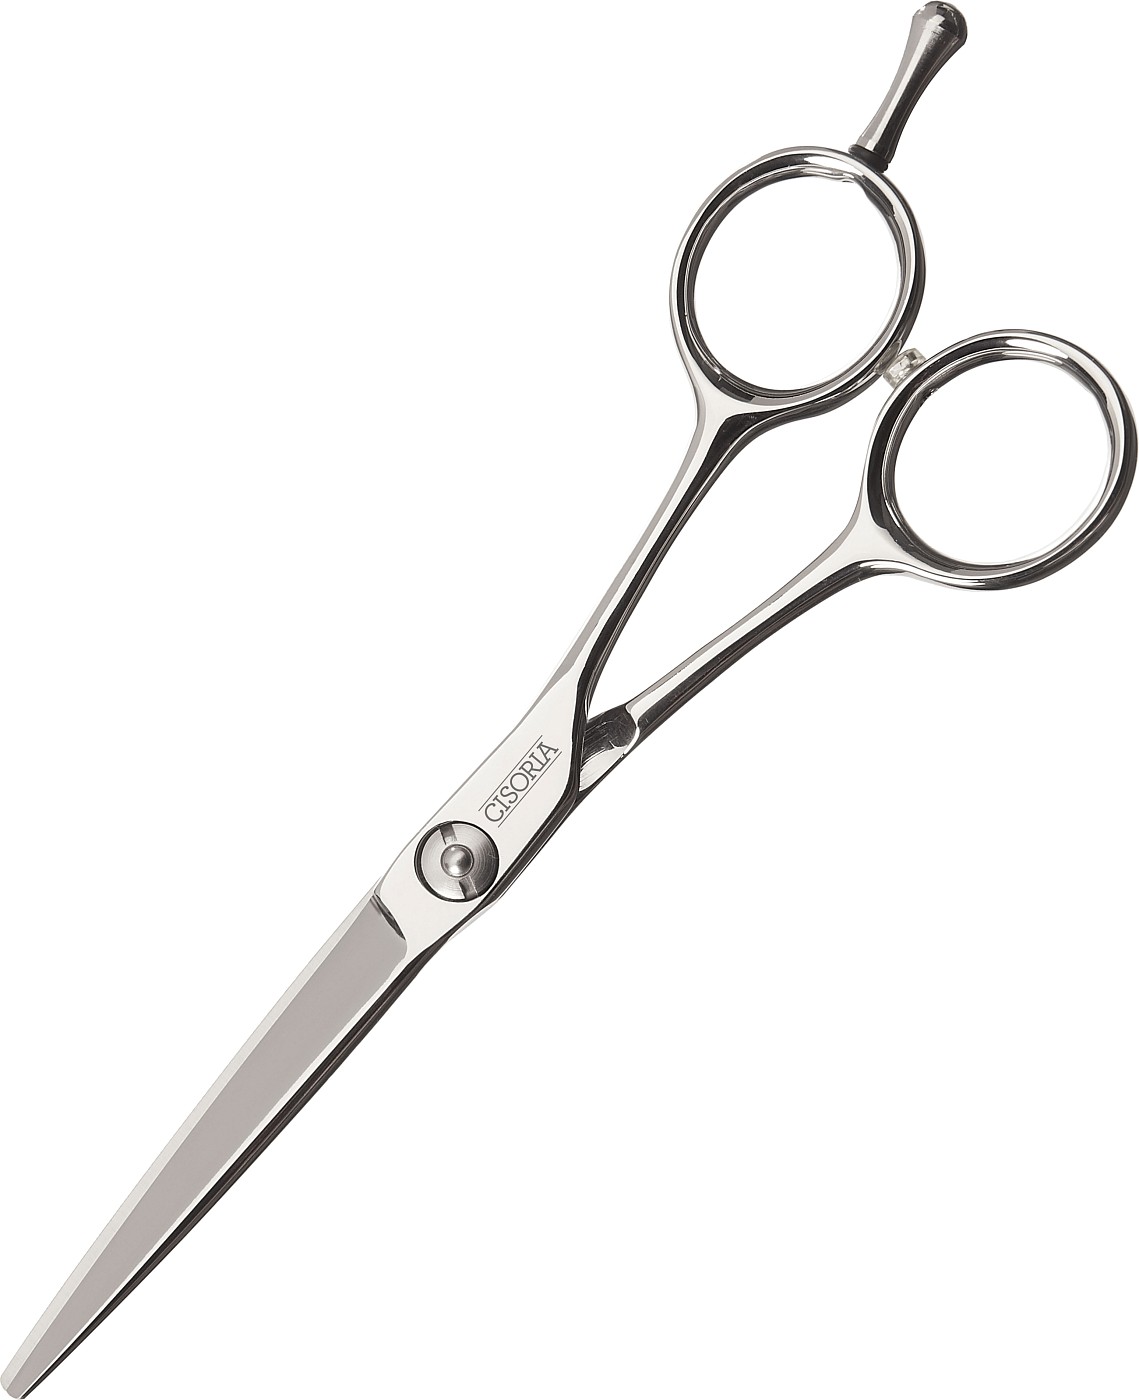  Cisoria Straight Cutting Scissors 5,5" Serie S550 by Sibel 